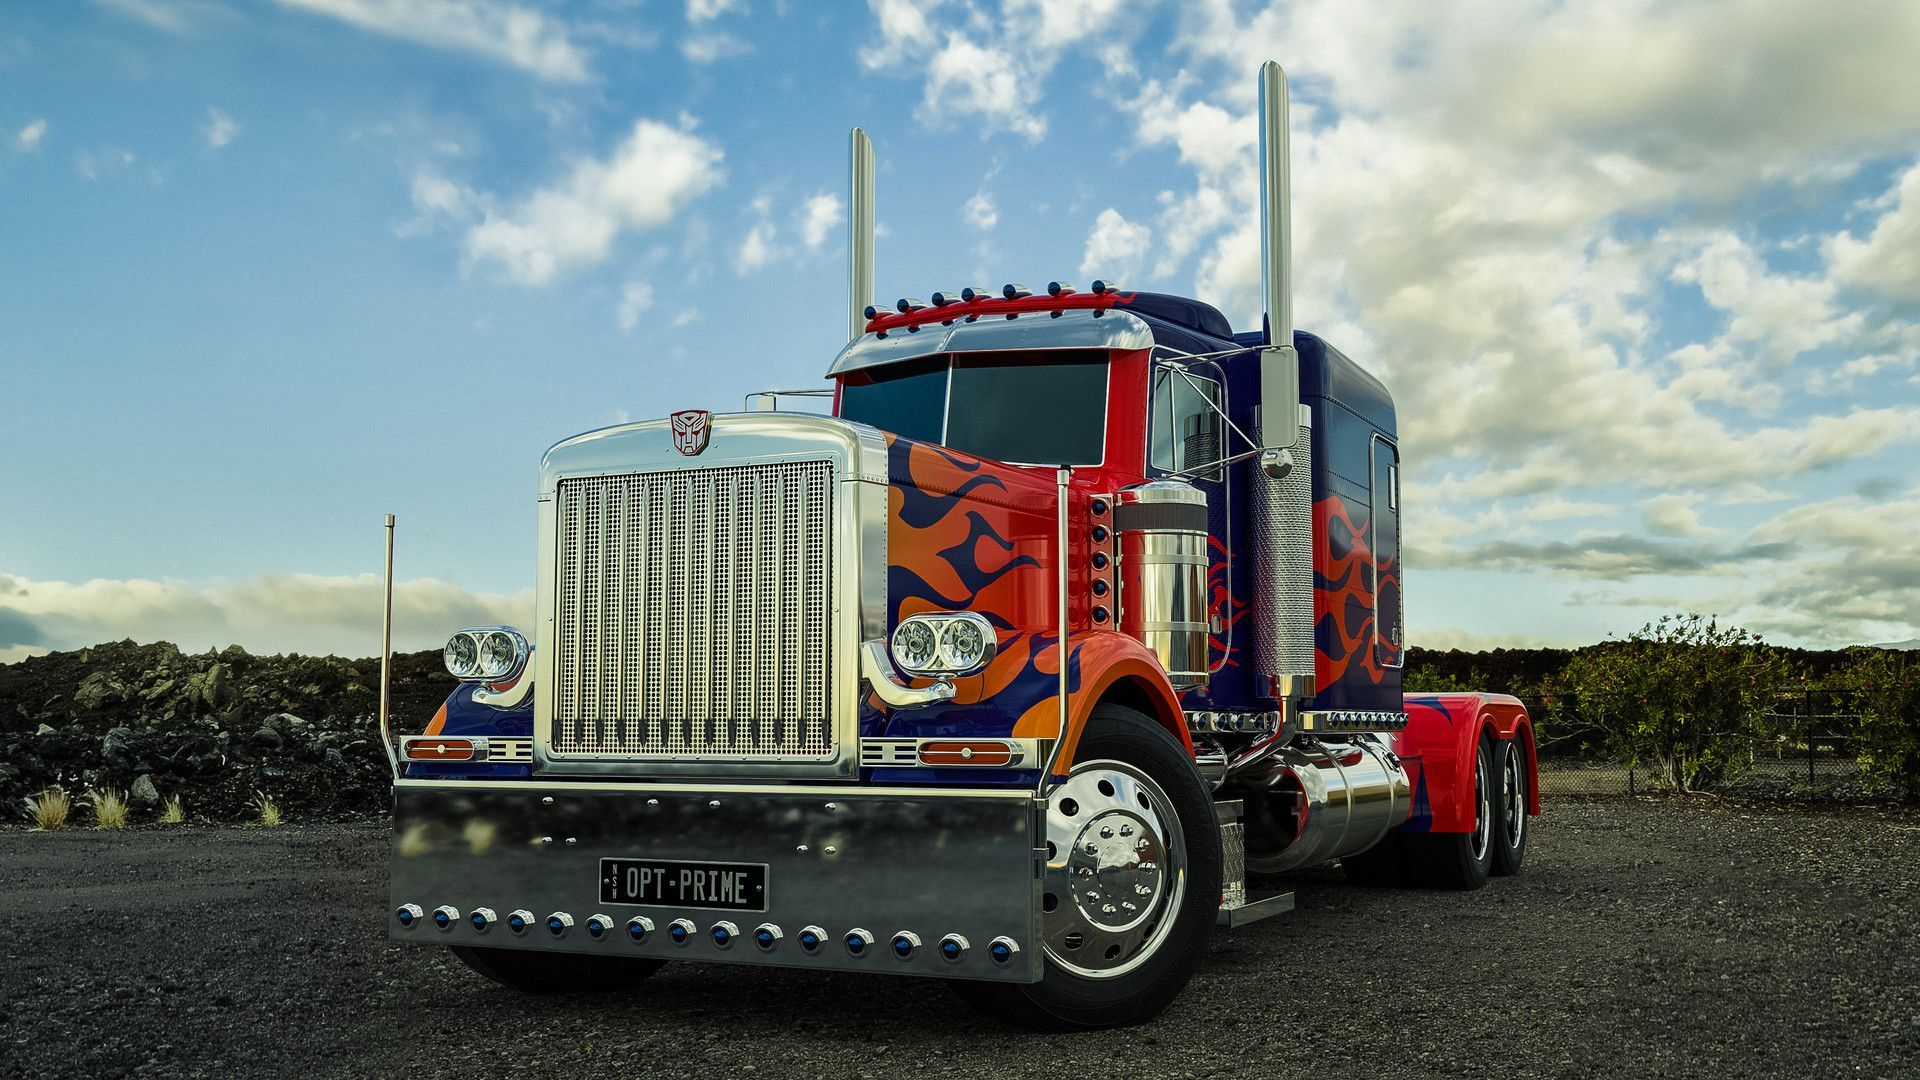 1920x1080 Optimus Prime Truck Wallpapers Top Free Optimus Prime Truck Backgrounds